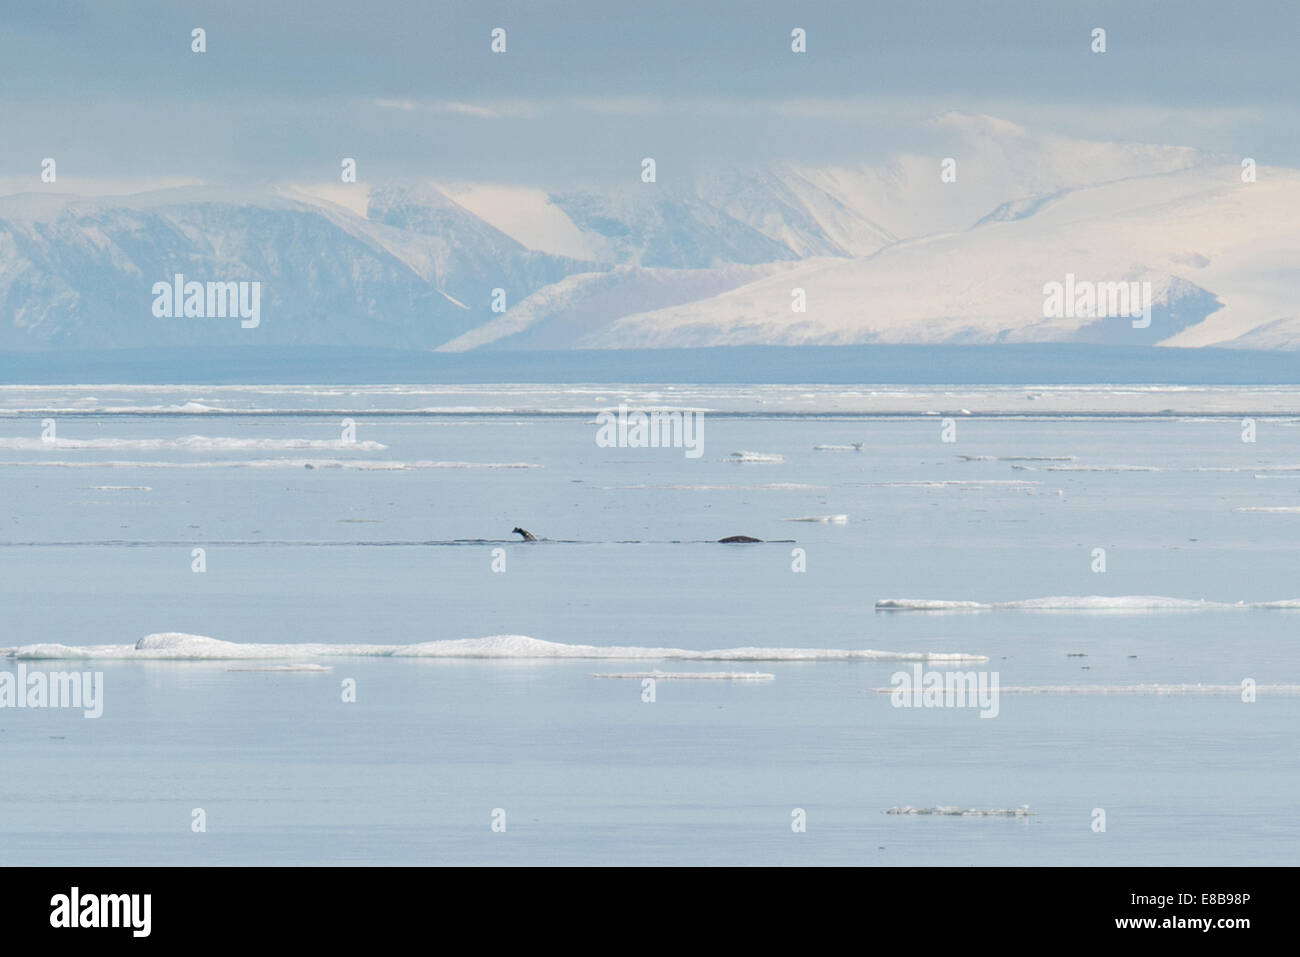 Narwhal, or Narwhale, Monodon monoceros, fluking at Milne Inlet, with mountains in background, Baffin Island, Arctic Ocean. Stock Photo